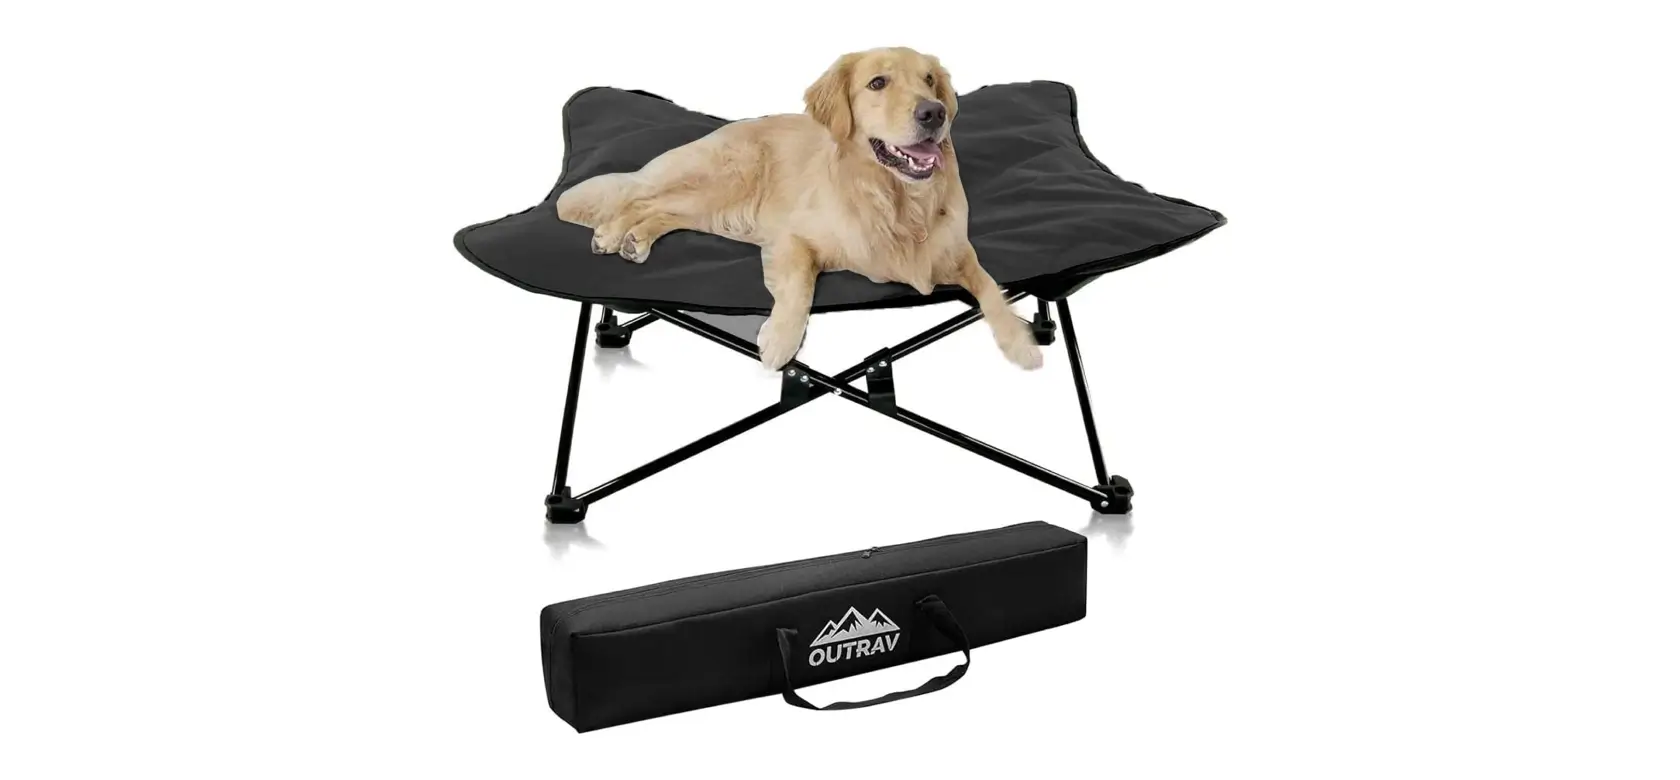 Portable Elevated Rv Dog Bed